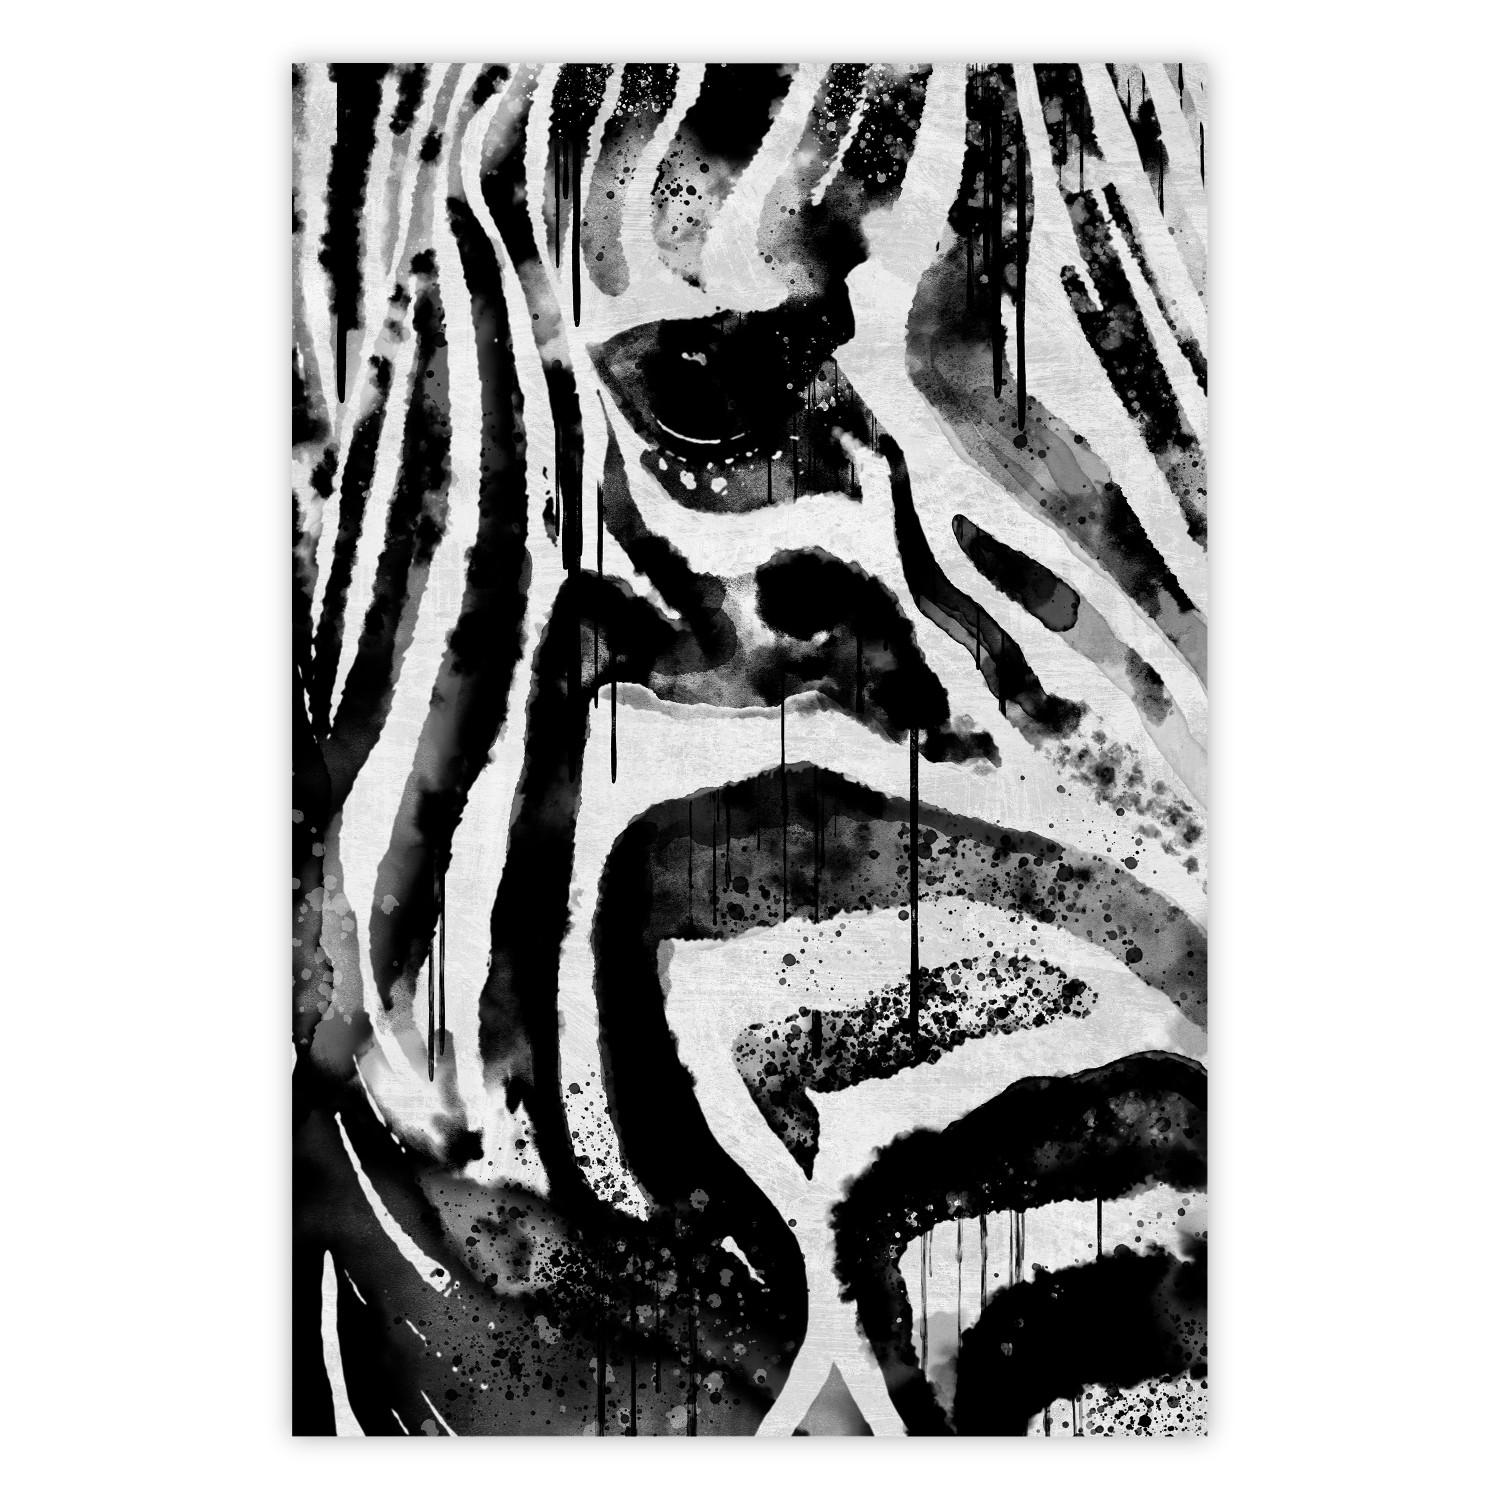 Poster Striped Nature - black and white striped zebra in an abstract motif